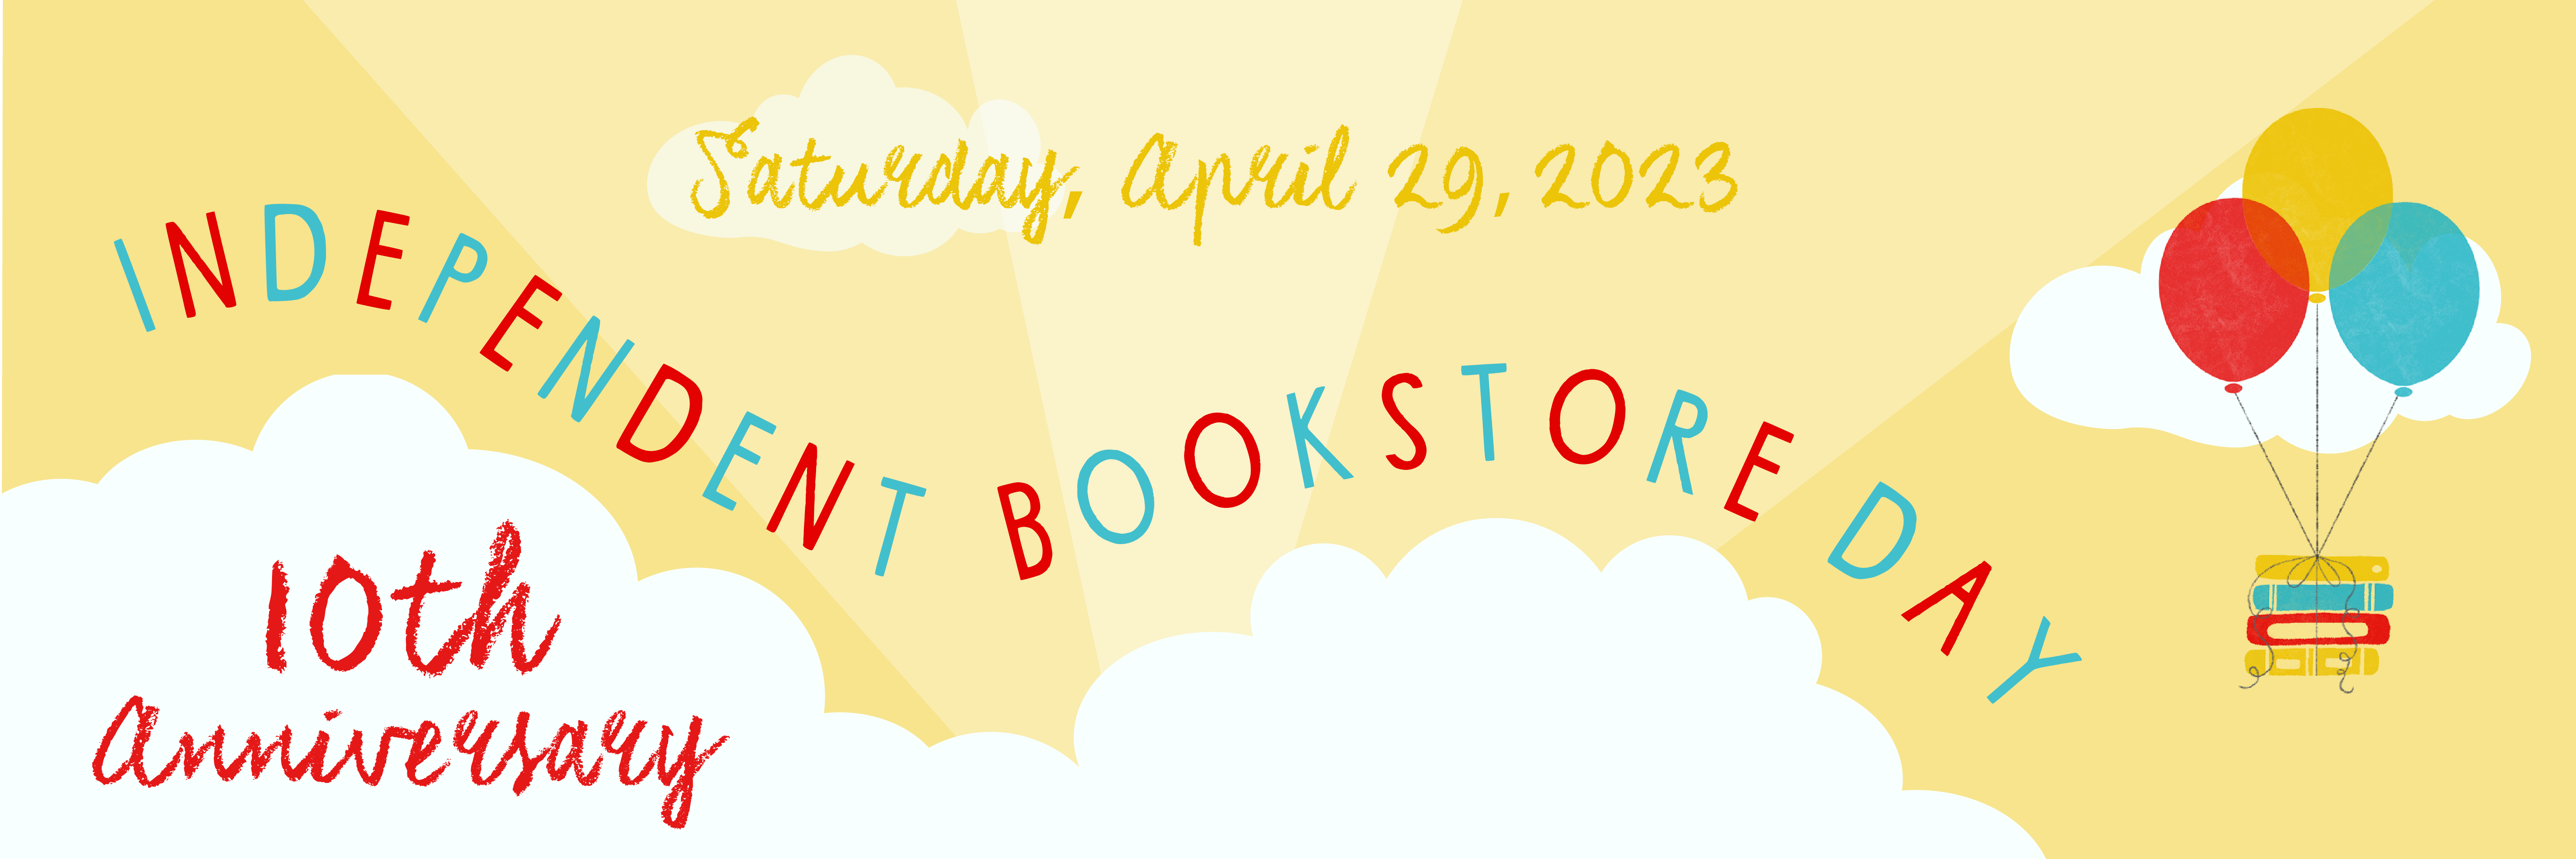 Banner graphic that says "Independent Bookstore Day, April 29, 2023, 10th anniversary" in red, blue, and yellow letters